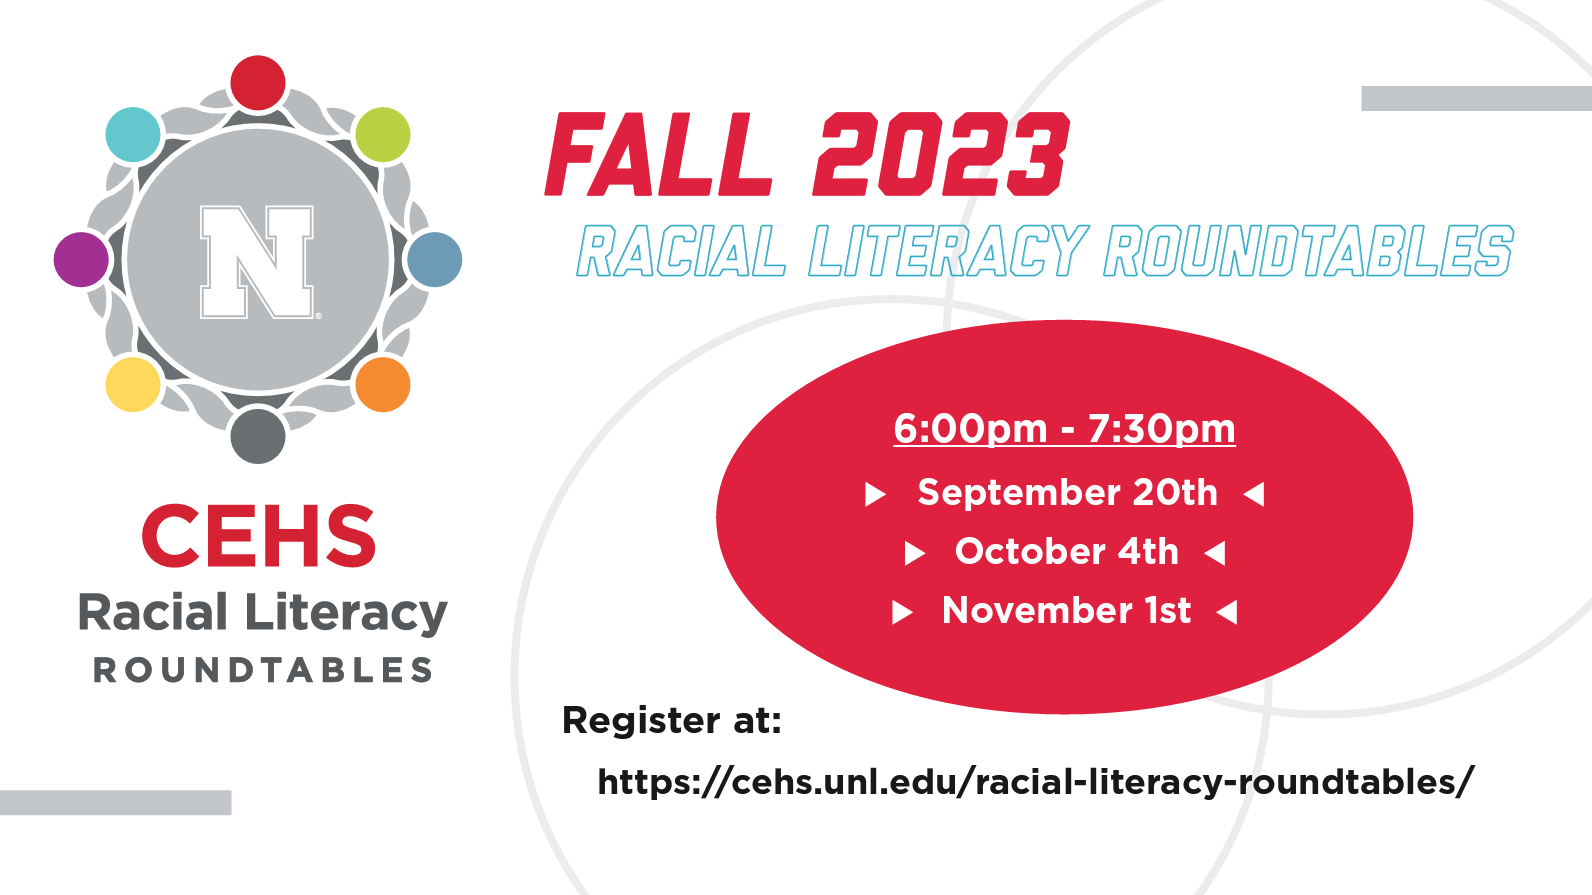 Fall 2023 Racial Literacy Roundtables, 6 - 7:30 p.m. September 20th, October 4th, November 1st, Register at cehs.unl.edu/racial-literacy-roundtables